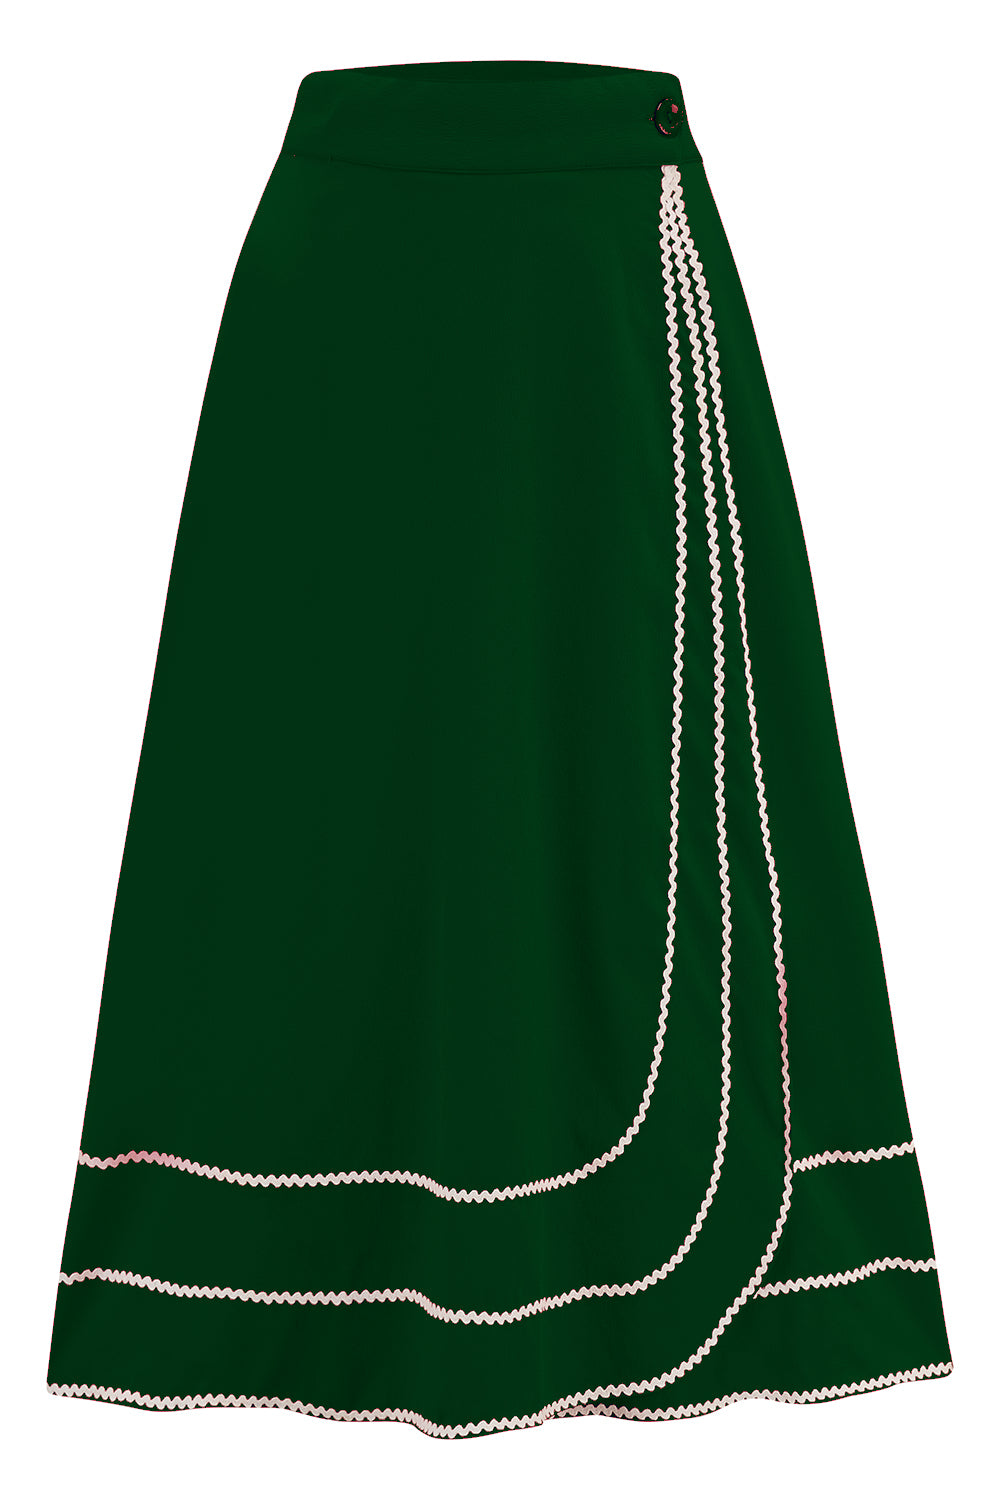 The "Glynis" Wrap Around Circle Skirt with Pockets in Green with Ivory Ric Rac, True & Authentic 1950s Vintage Style